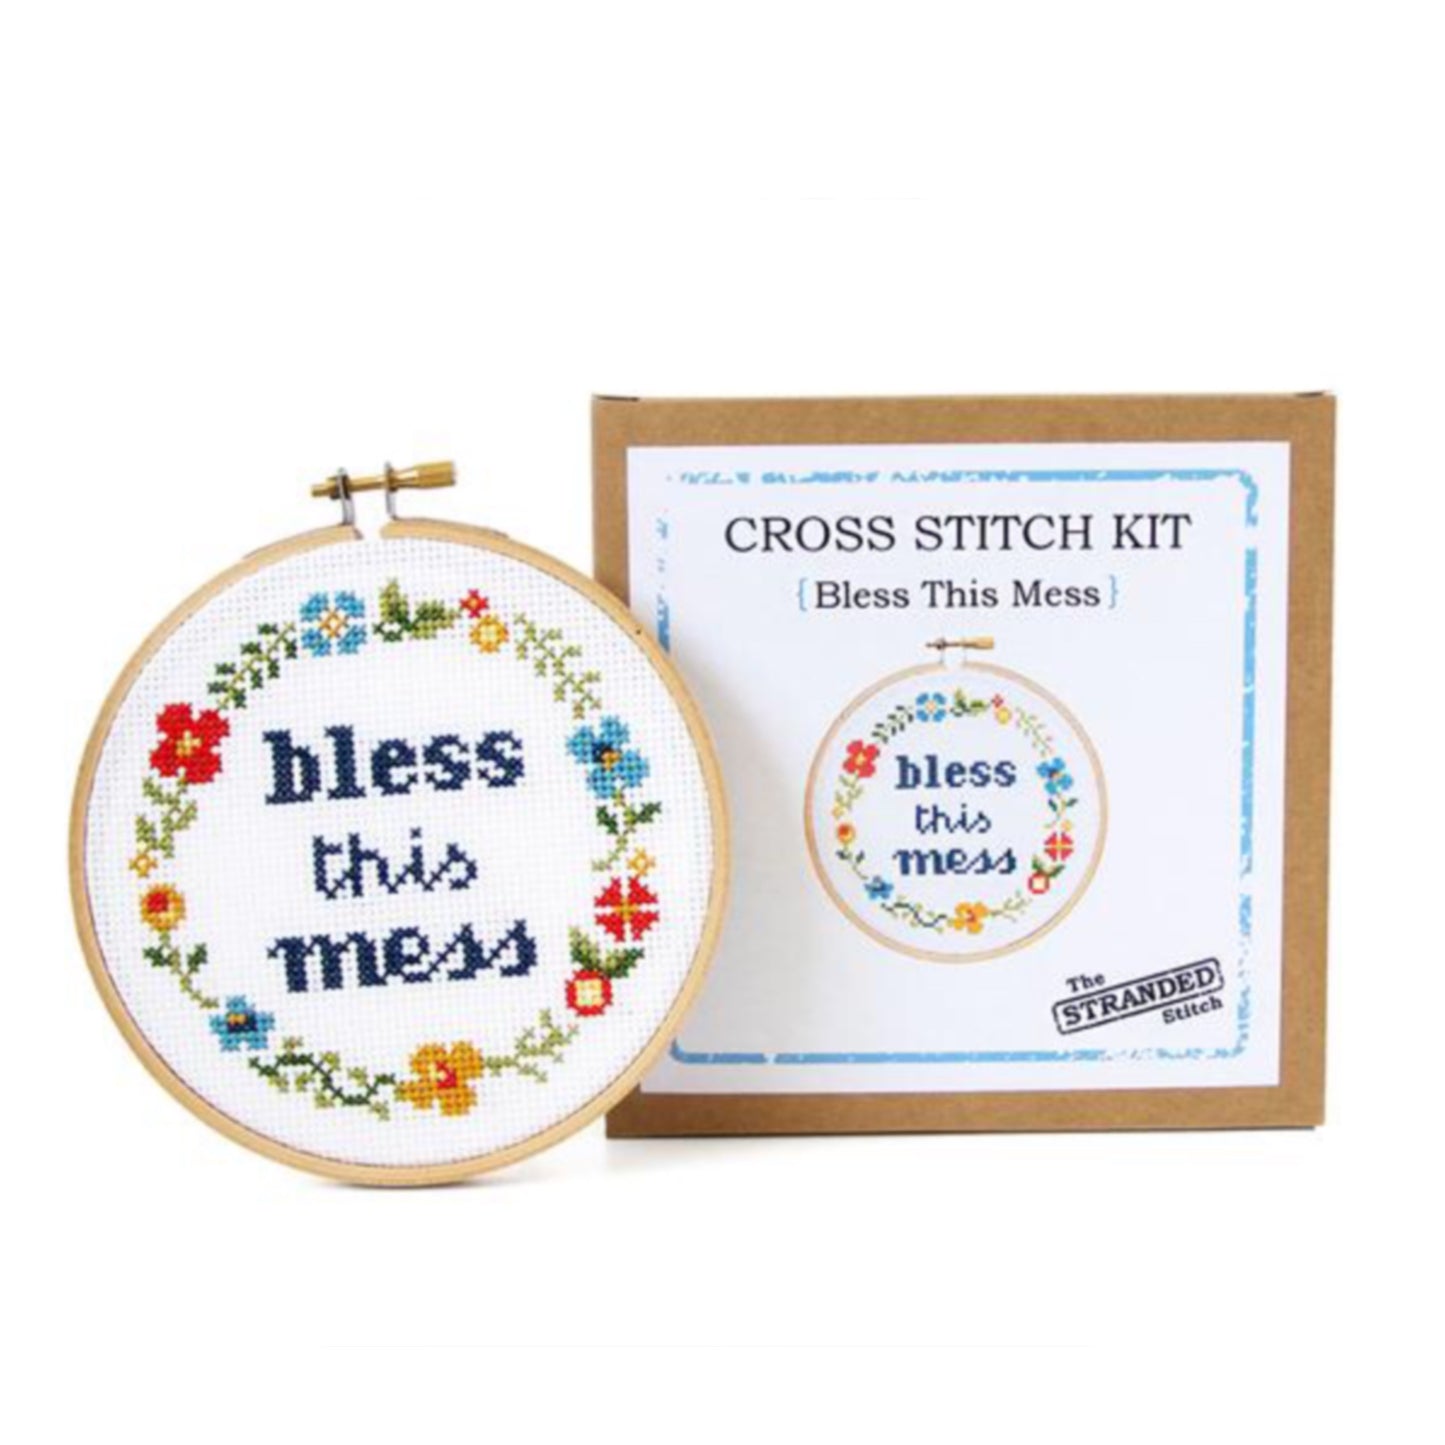 "Bless This Mess" DIY Cross Stitch Kit - by The Stranded Stitch - K. A. Artist Shop